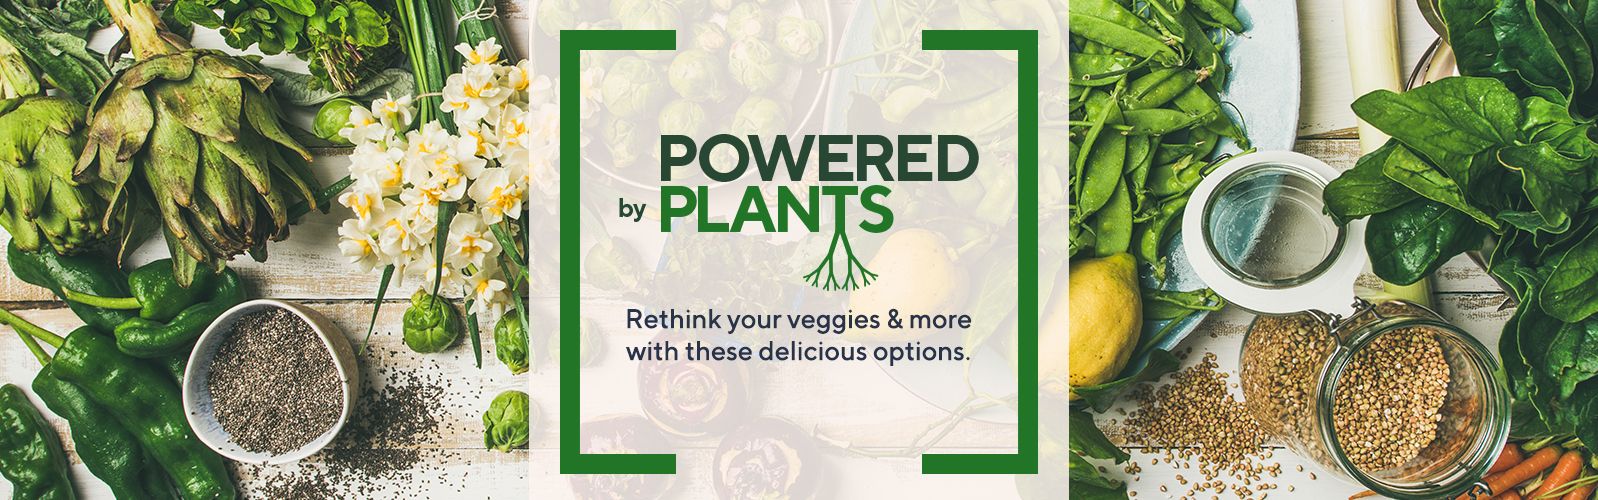 Rethink your veggies & more with these delicious options. 